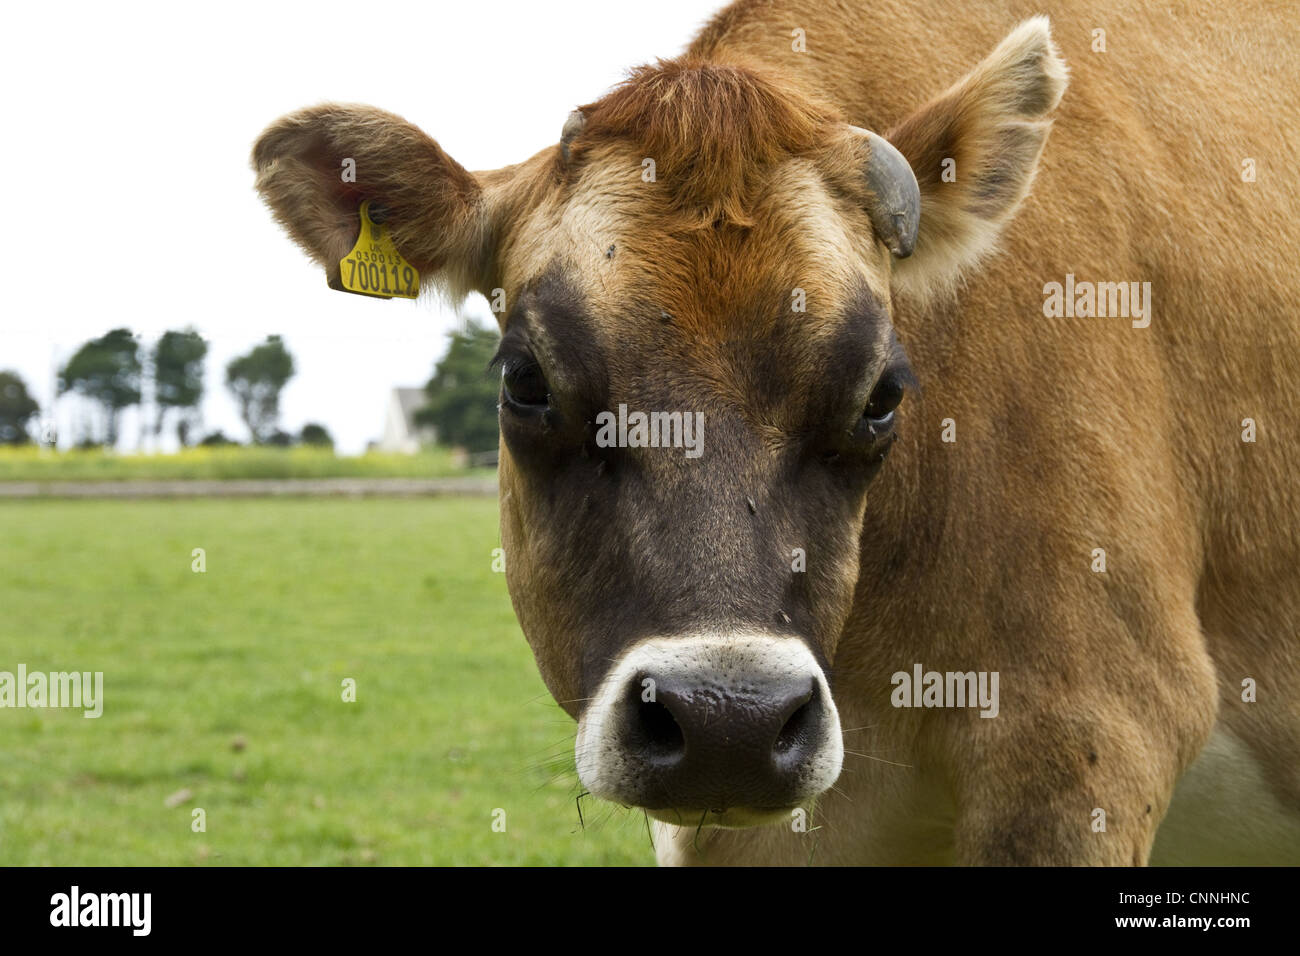 Jersey Cow with ear tag Stock Photo